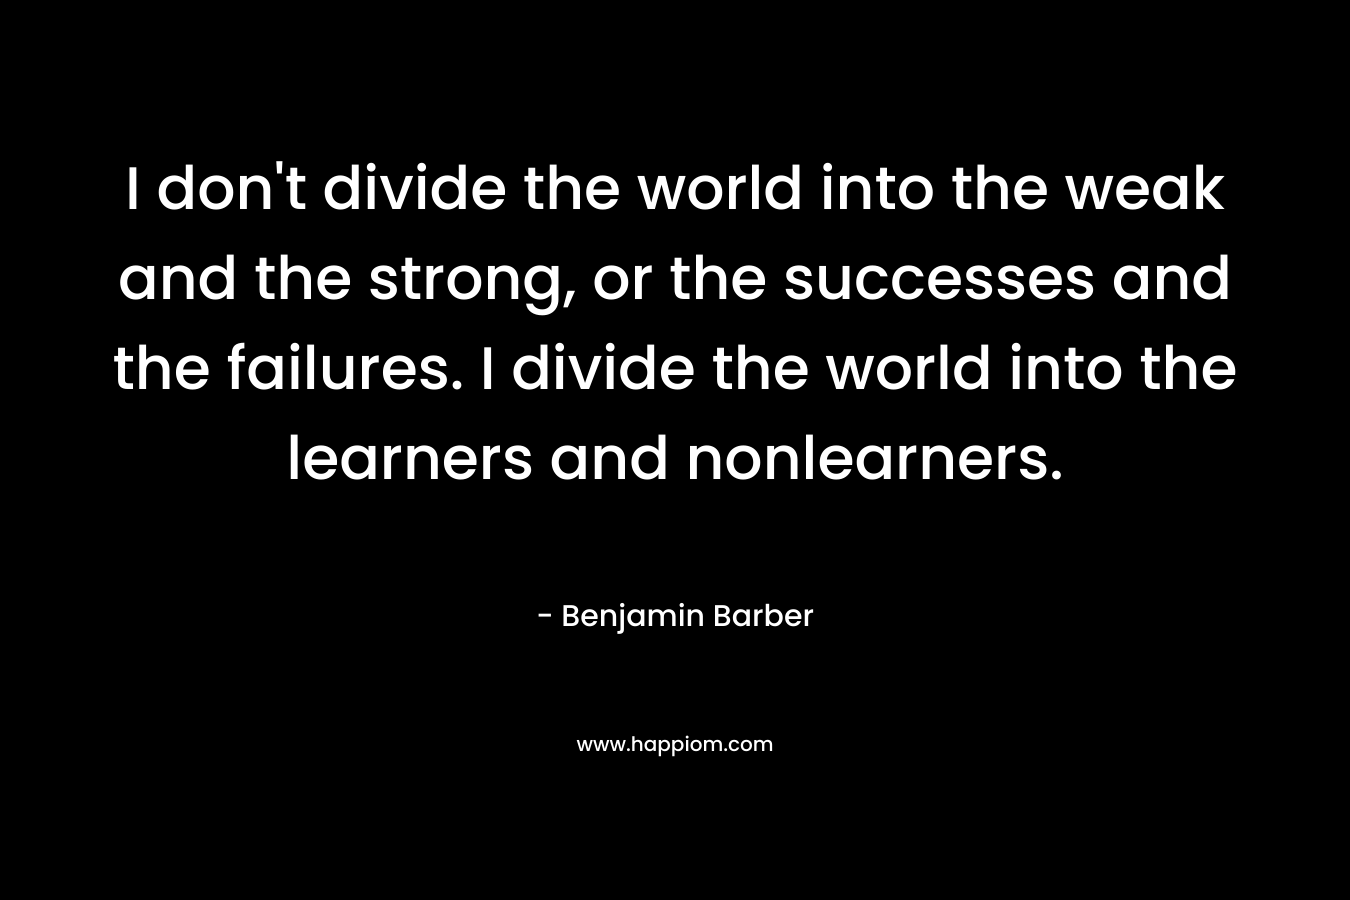 I don't divide the world into the weak and the strong, or the successes and the failures. I divide the world into the learners and nonlearners.